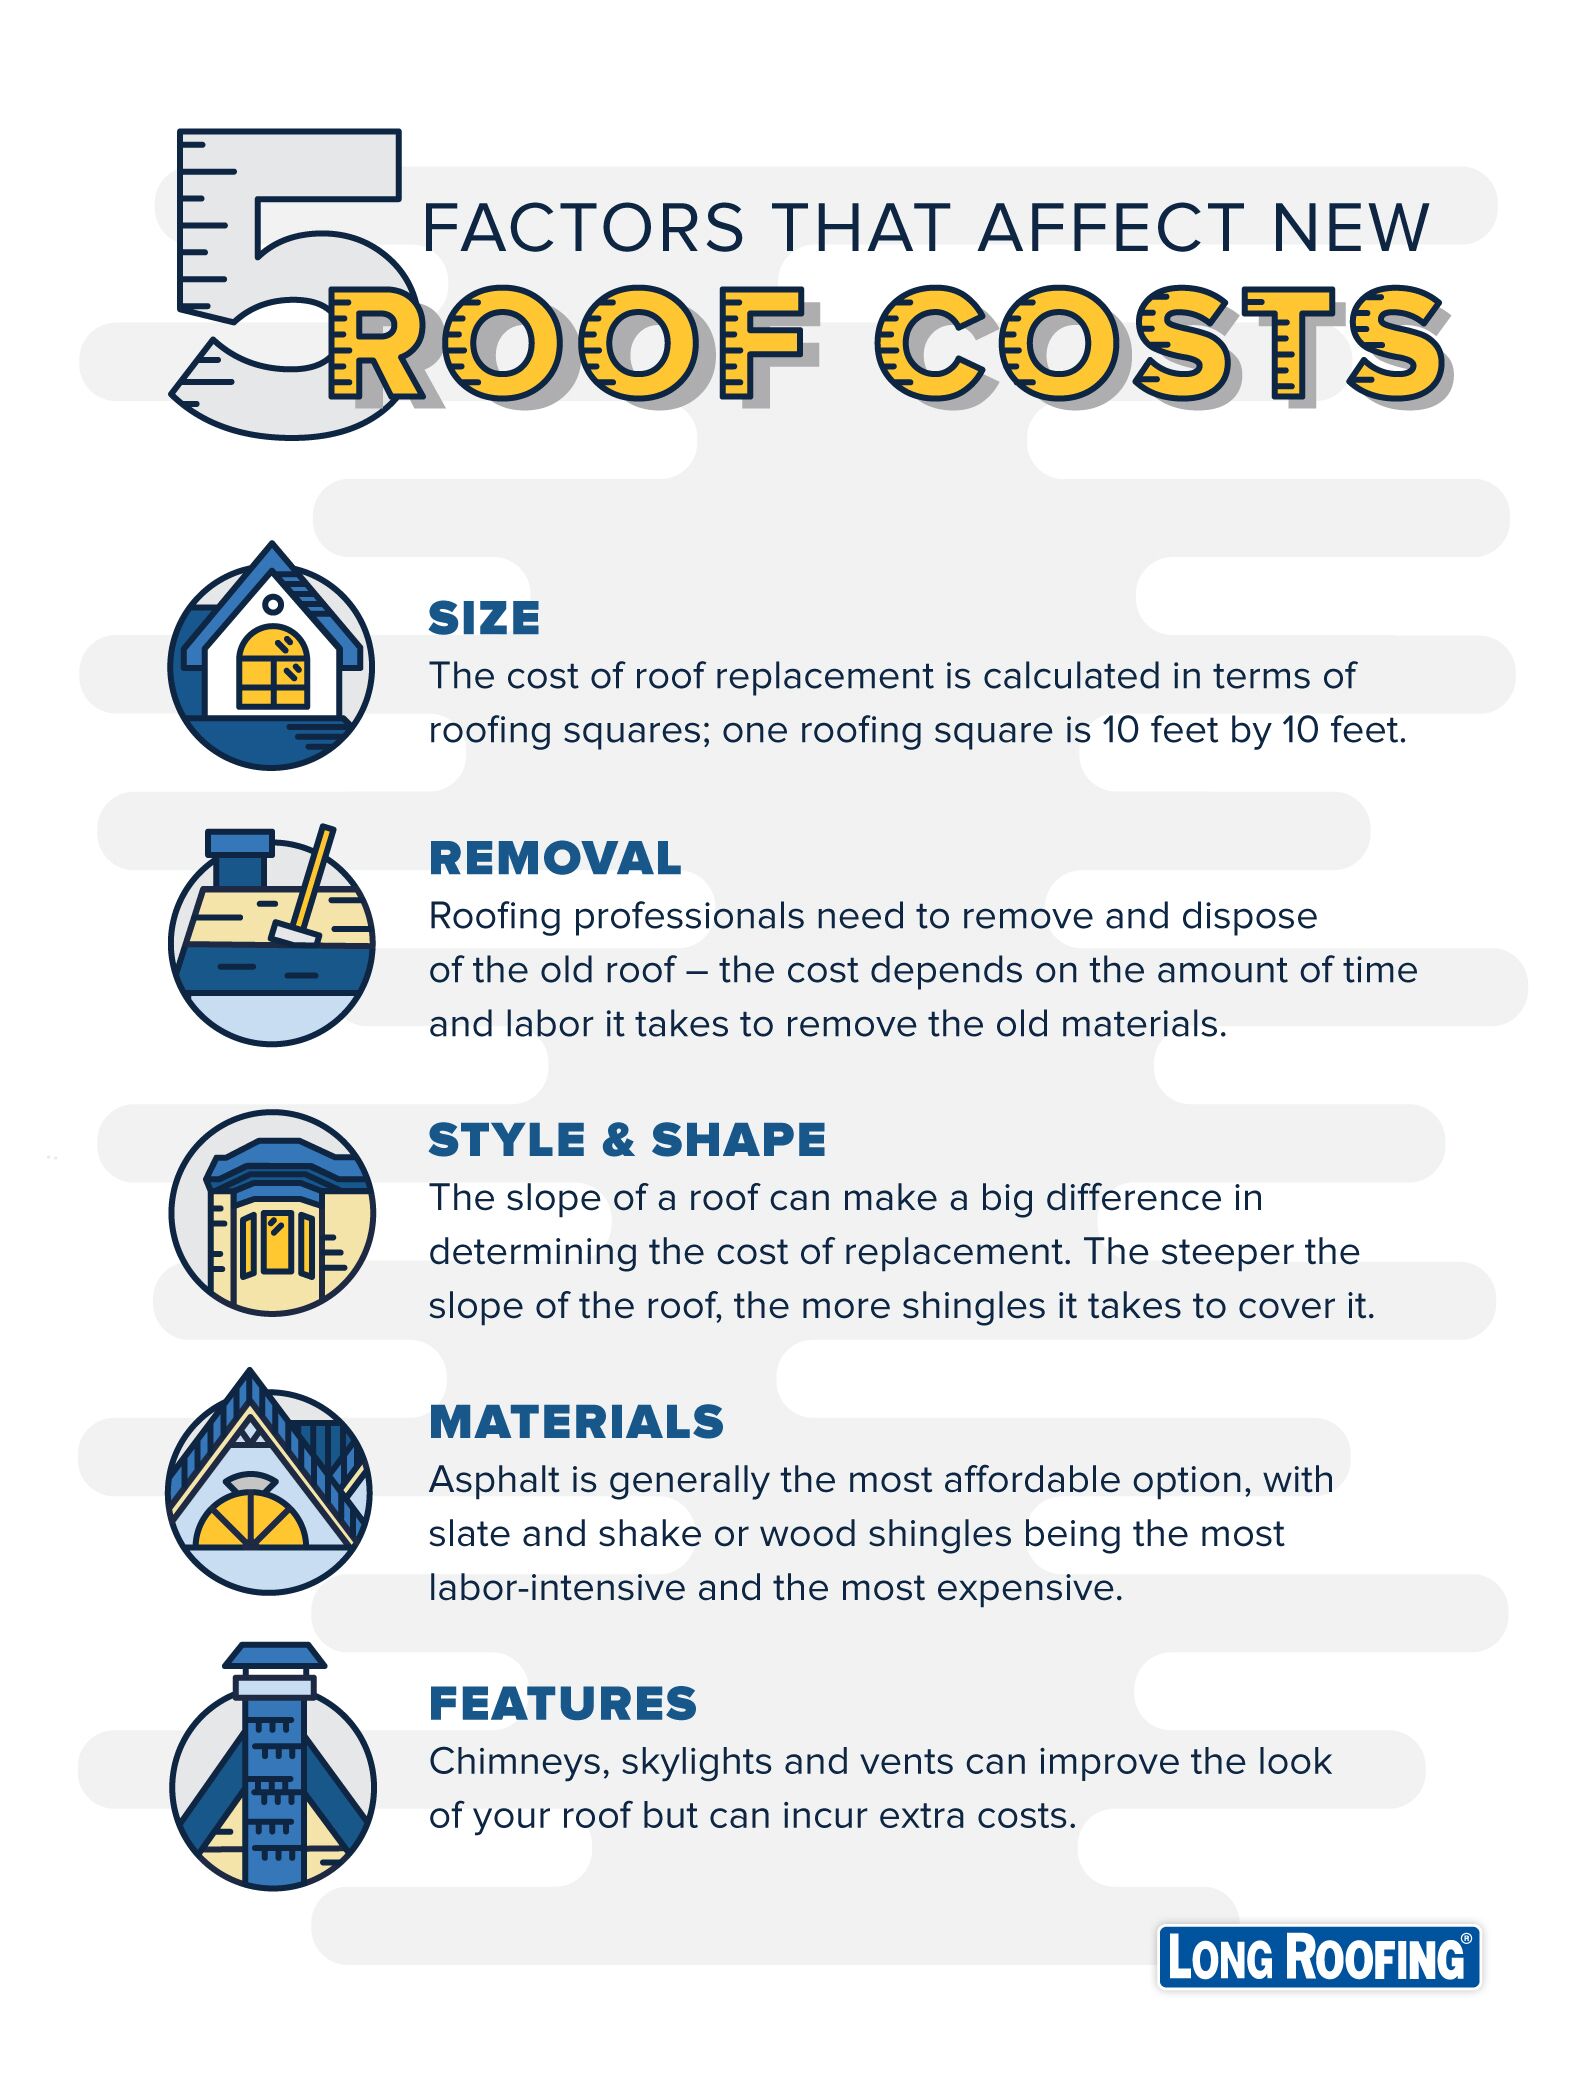 New roof cost.